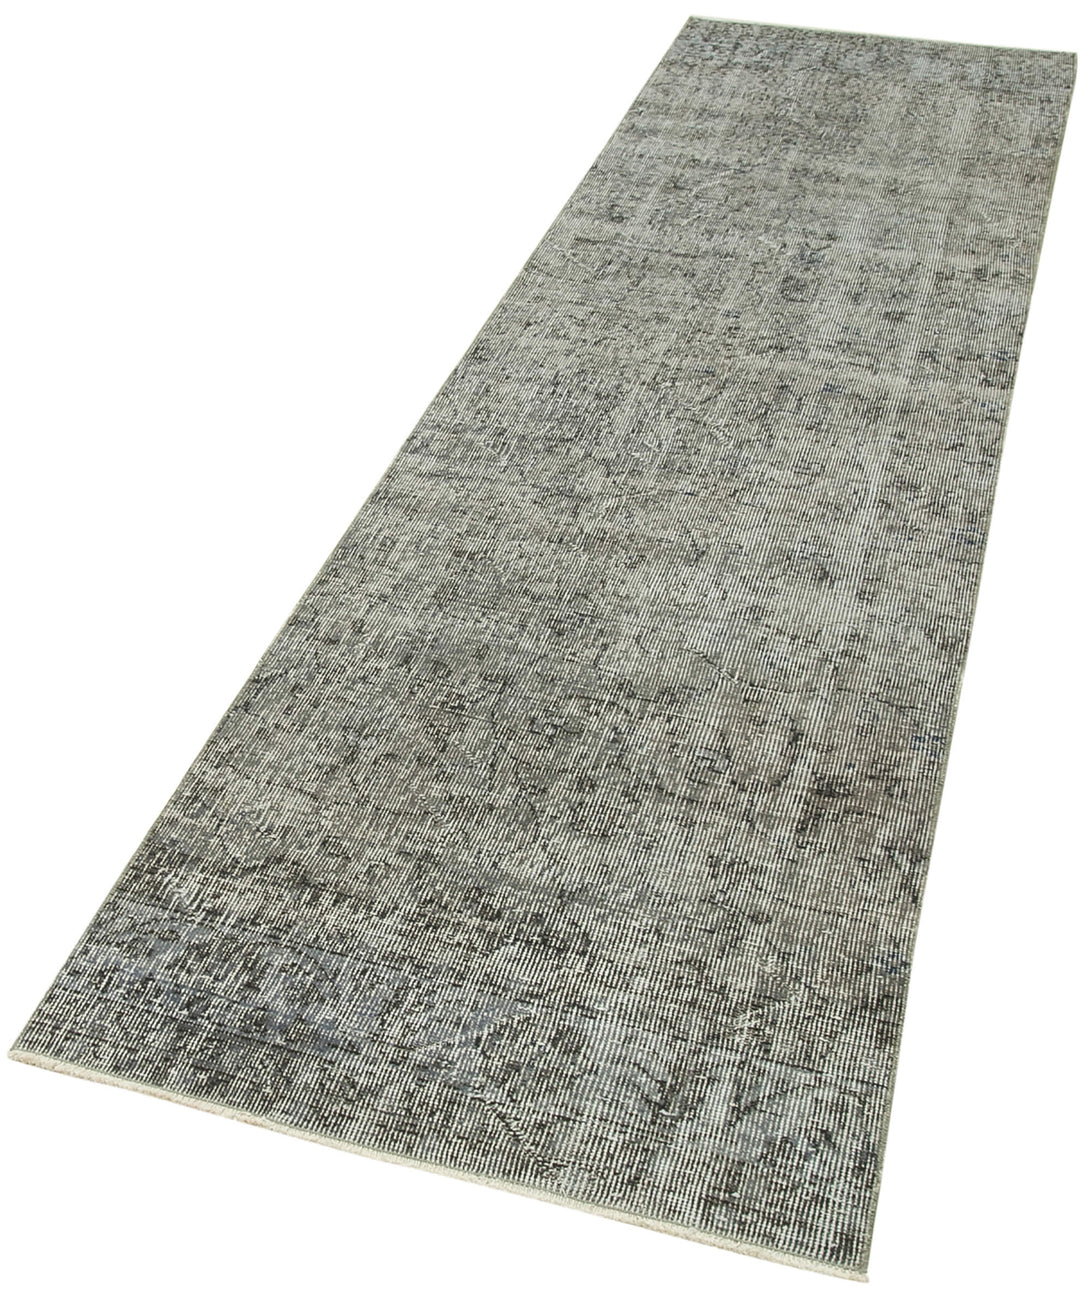 Handmade Overdyed Runner > Design# OL-AC-38253 > Size: 2'-7" x 9'-11", Carpet Culture Rugs, Handmade Rugs, NYC Rugs, New Rugs, Shop Rugs, Rug Store, Outlet Rugs, SoHo Rugs, Rugs in USA